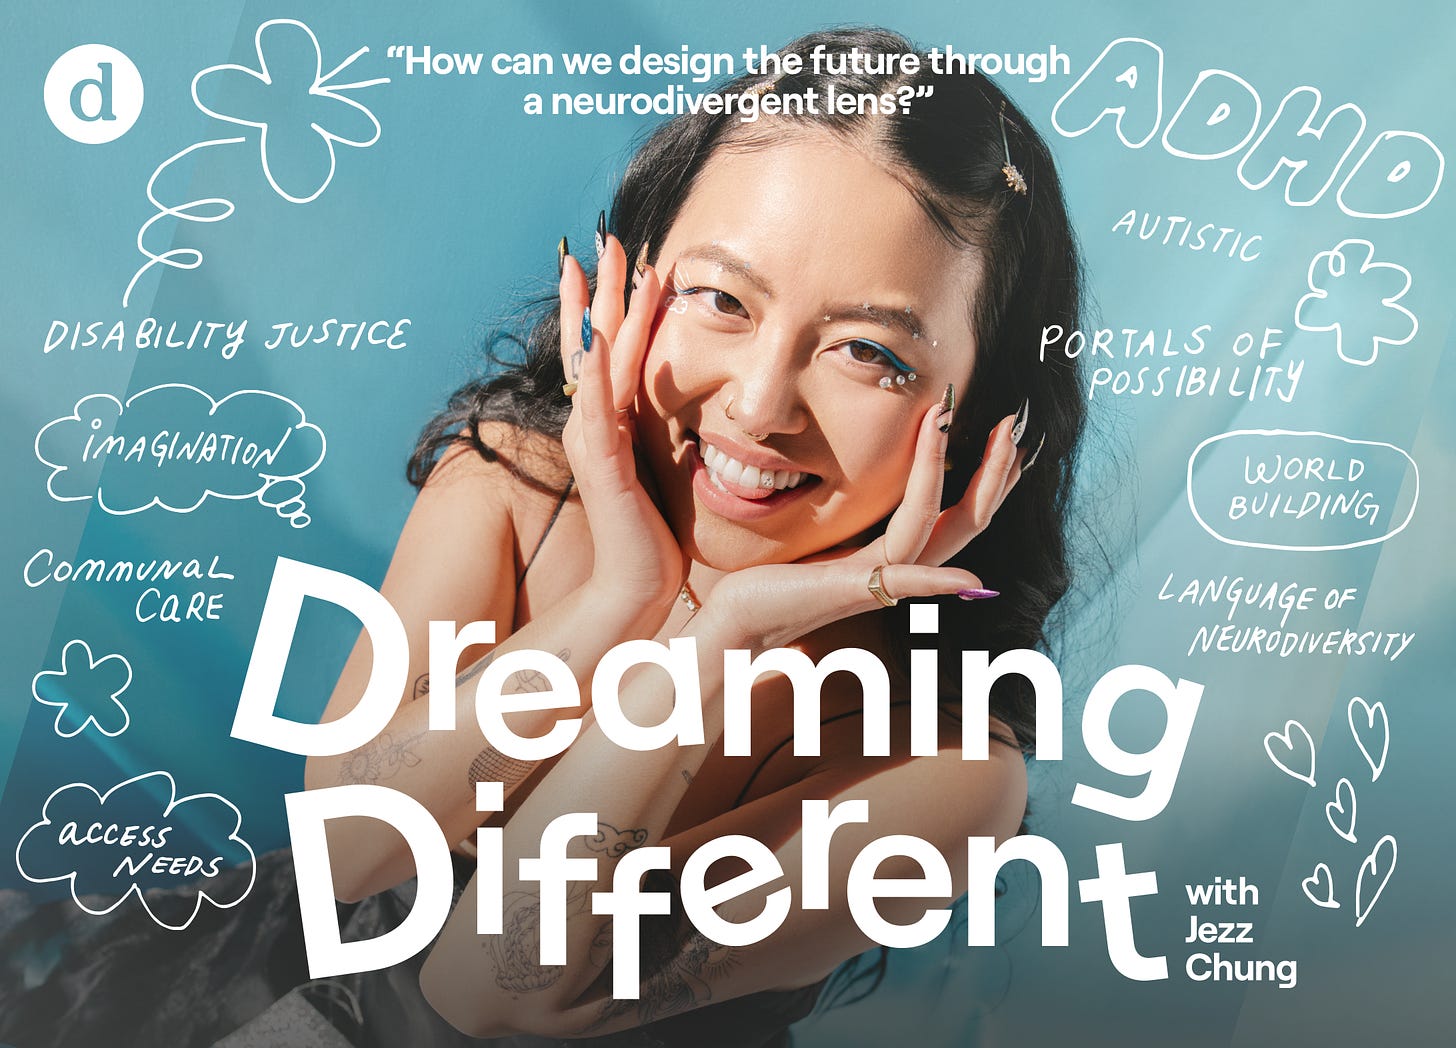 Cover art for the audio series features Jezz Chung, an Asian person with tattoos and long black hair, smiling with their hands framing their face in a playful gesture. At the bottom is bold white text that reads: Dreaming Different with Jezz Chung. Floating around Jezz’s face are topics from the intro episode in handwritten type: language of neurodiversity, imagination, disability justice, ADHD, autistic, portals of possibility, world building.